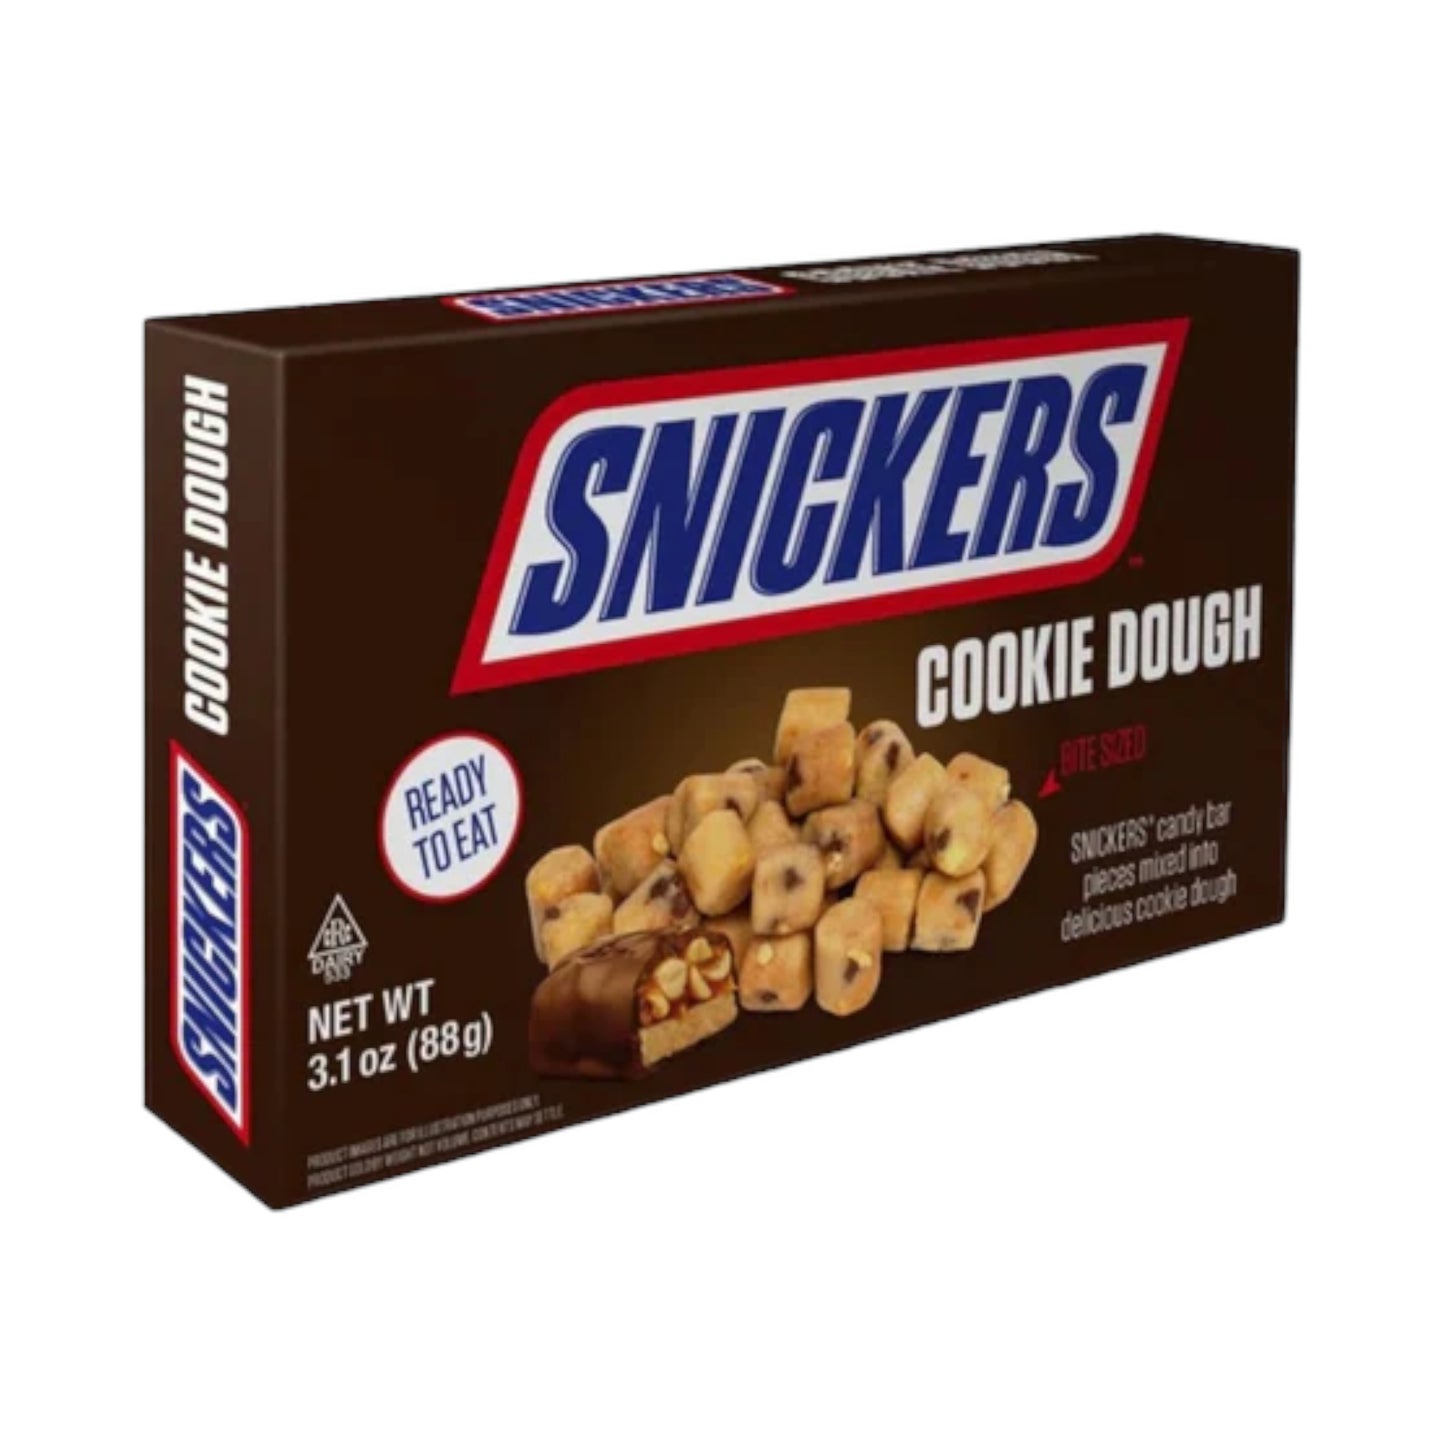 Snickers Cookie Dough 3.1Oz (88G) - Theater Box